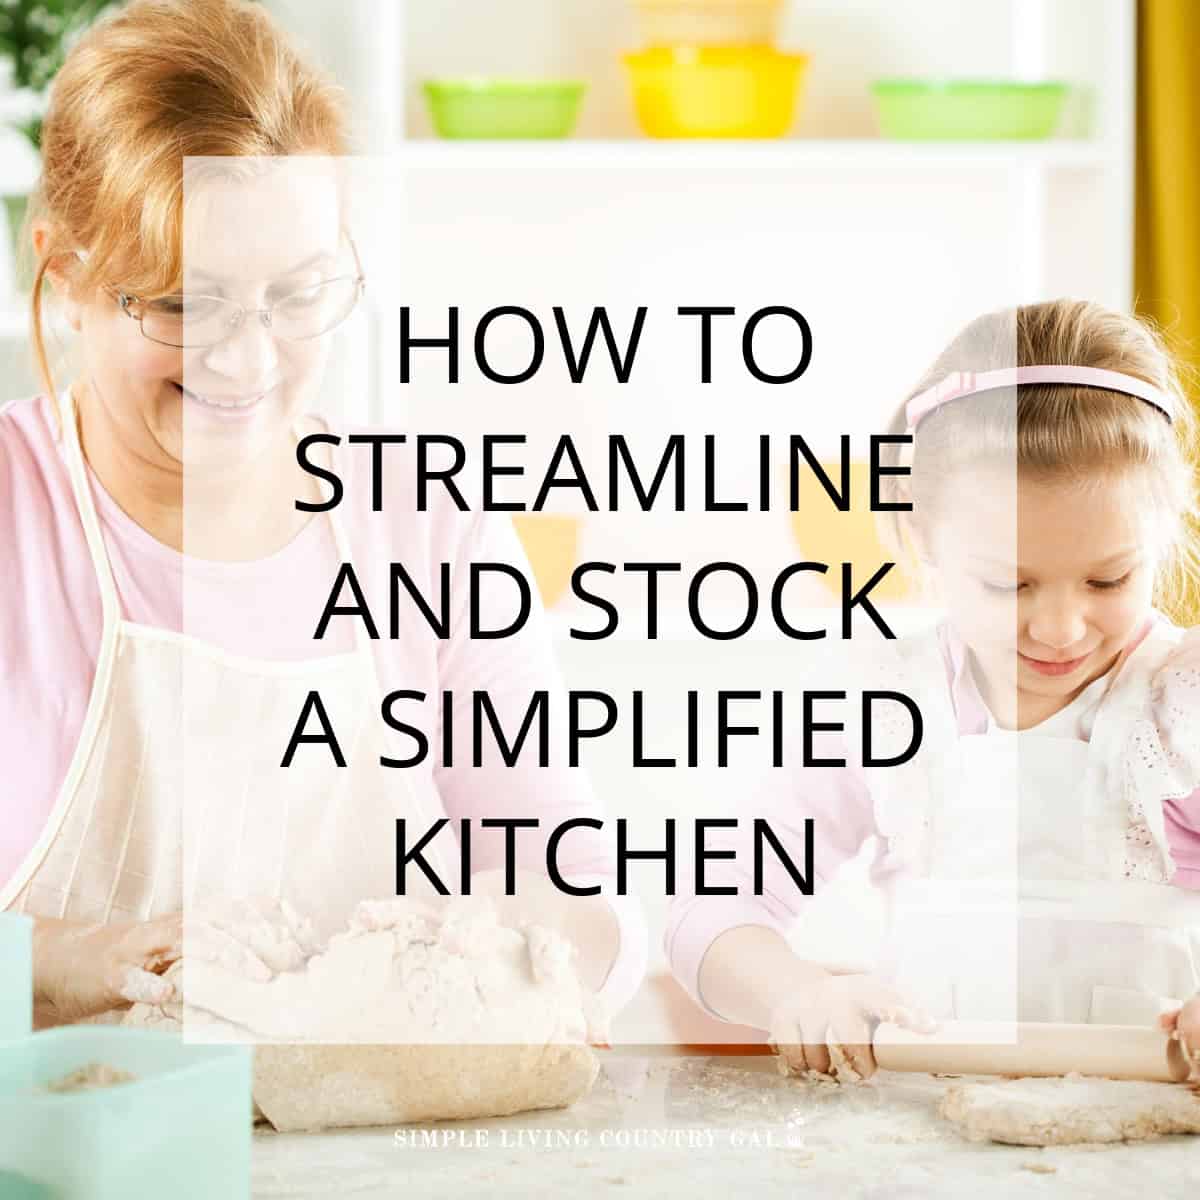 SIMPLE COOKING TIPS FOR THE KITCHEN